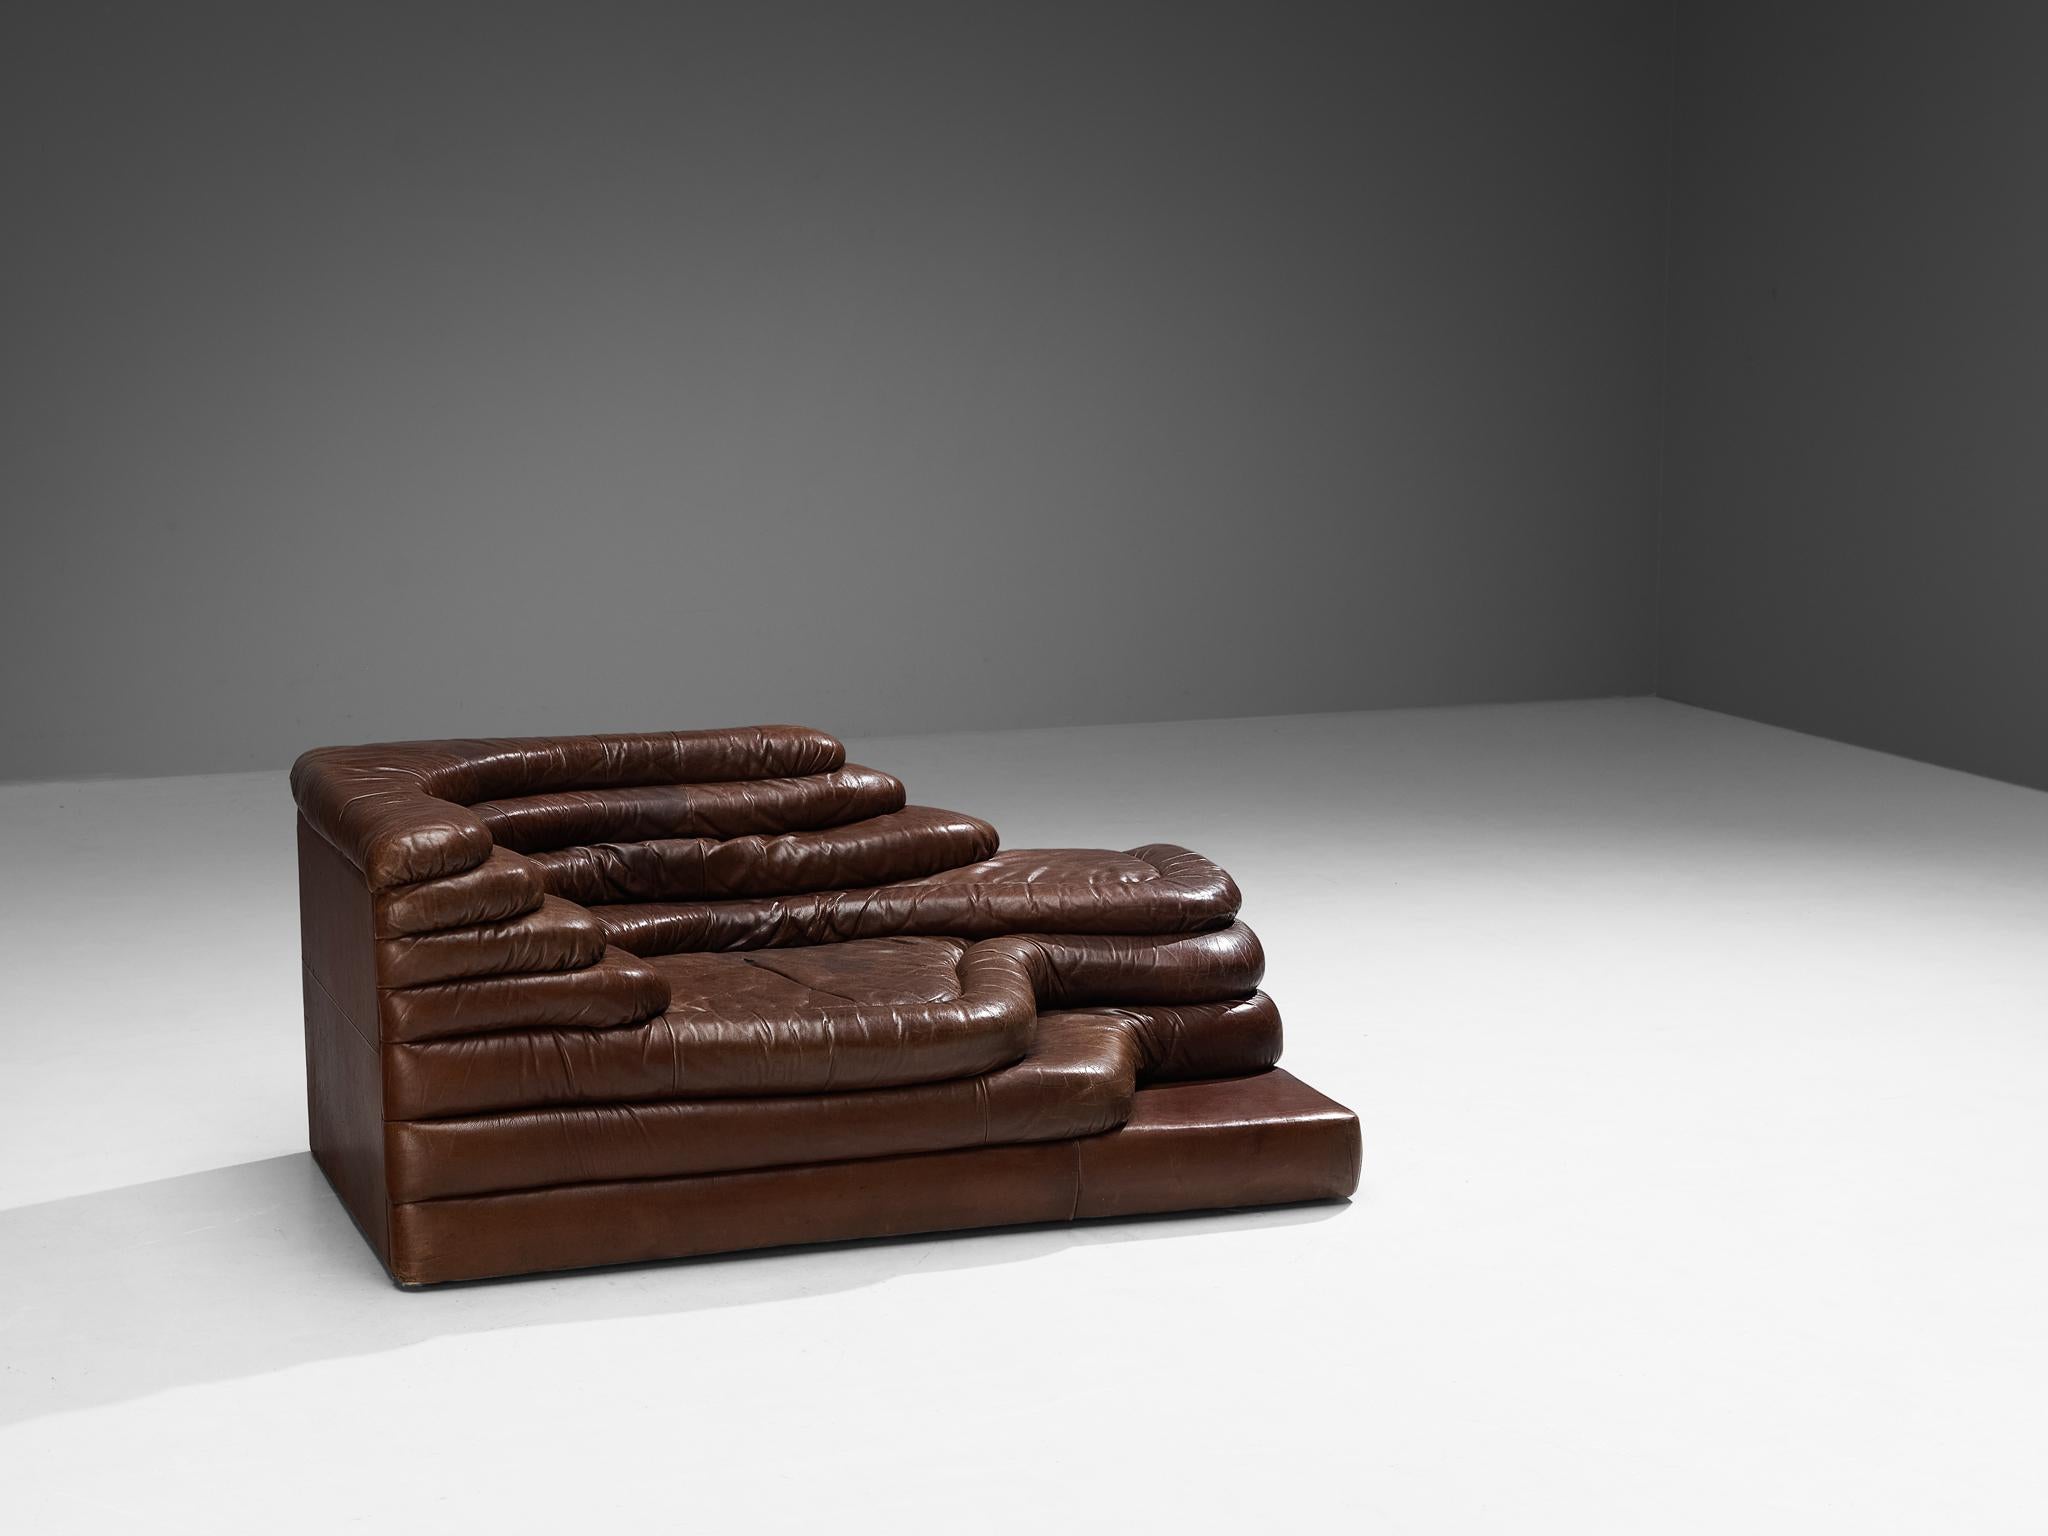 Ubald Klug for De Sede, DS-1025 'Terrazza' landscape sofa element, leather, Switzerland, 1970s

Waterfall shaped sofas in a dark brown leather by the Swiss manufacturer De Sede. The design for this sofa was inspired by mountains and especially the